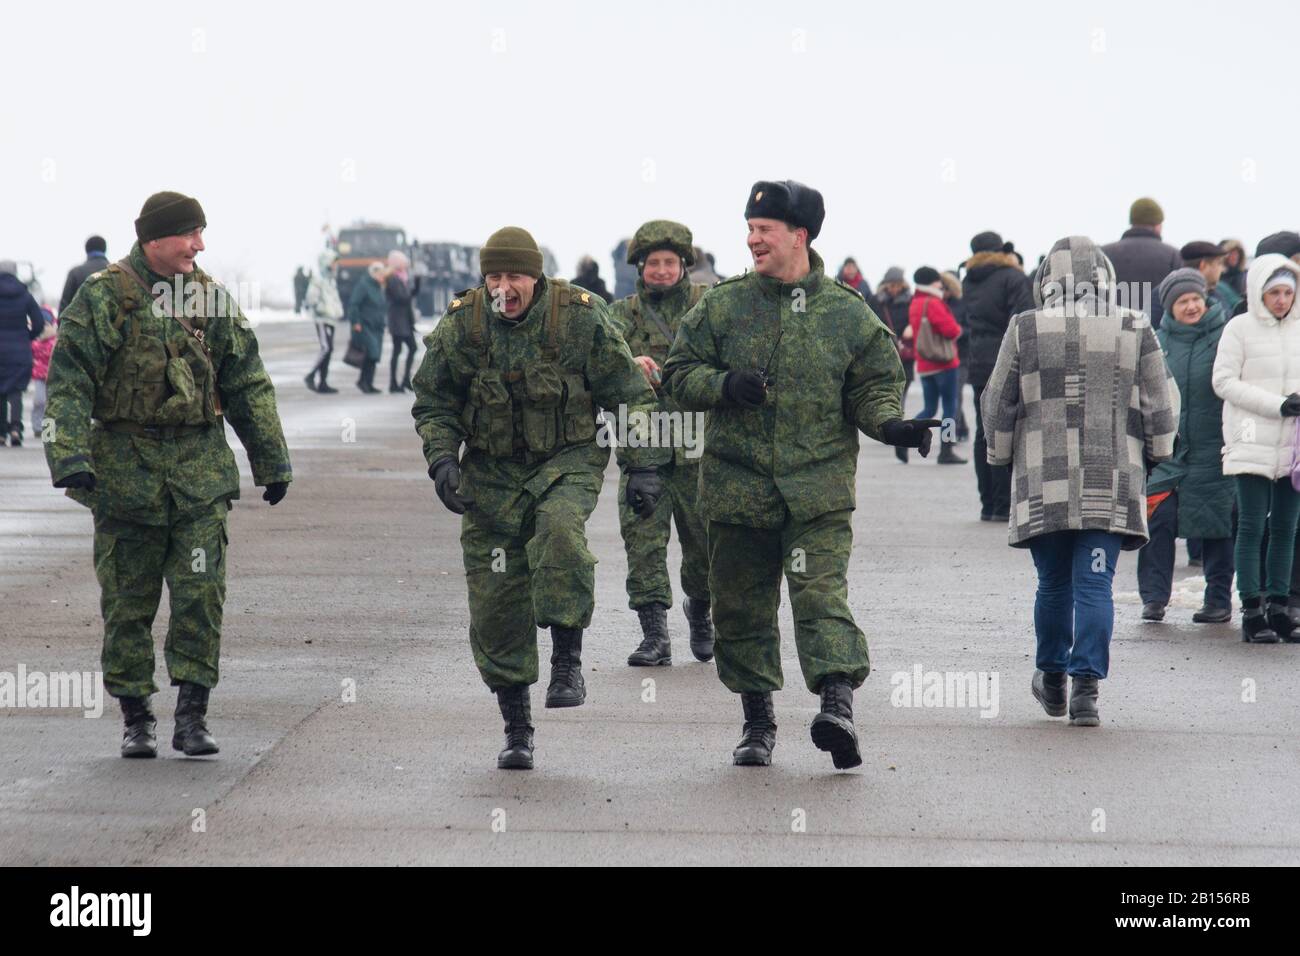 February 23, 2020. Ukraine, Lugansk region. Servicemen of armed forces of self-proclaimed Lugansk People's Republic (LPR), local residents and military equipment during the celebration of Defender of the Fatherland Day in the Patriot Park on the territory of the former Lugansk Airport. Stock Photo